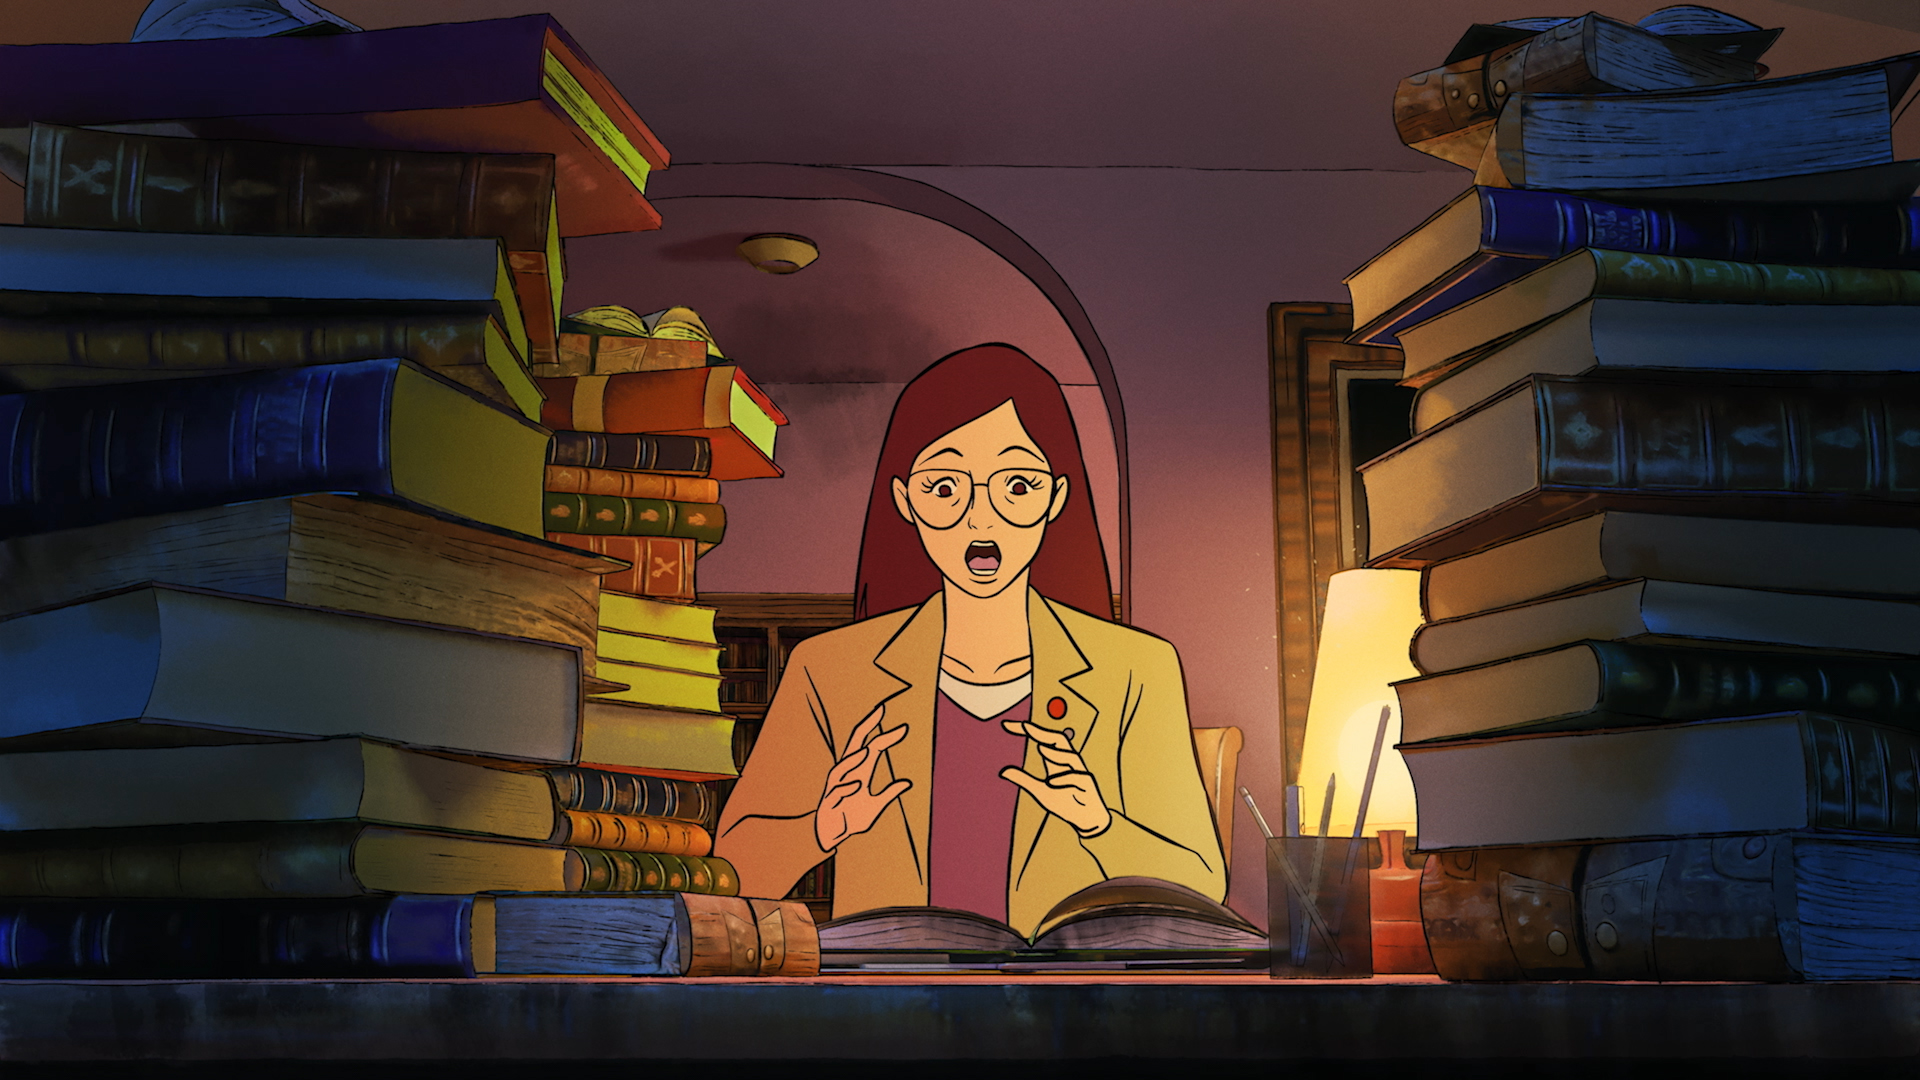 An animated still from the 'Creepshow' segment titled 'The Things in Oakwood's Past' shows Marnie, the local librarian. Marnie is voiced by Danielle Harris.